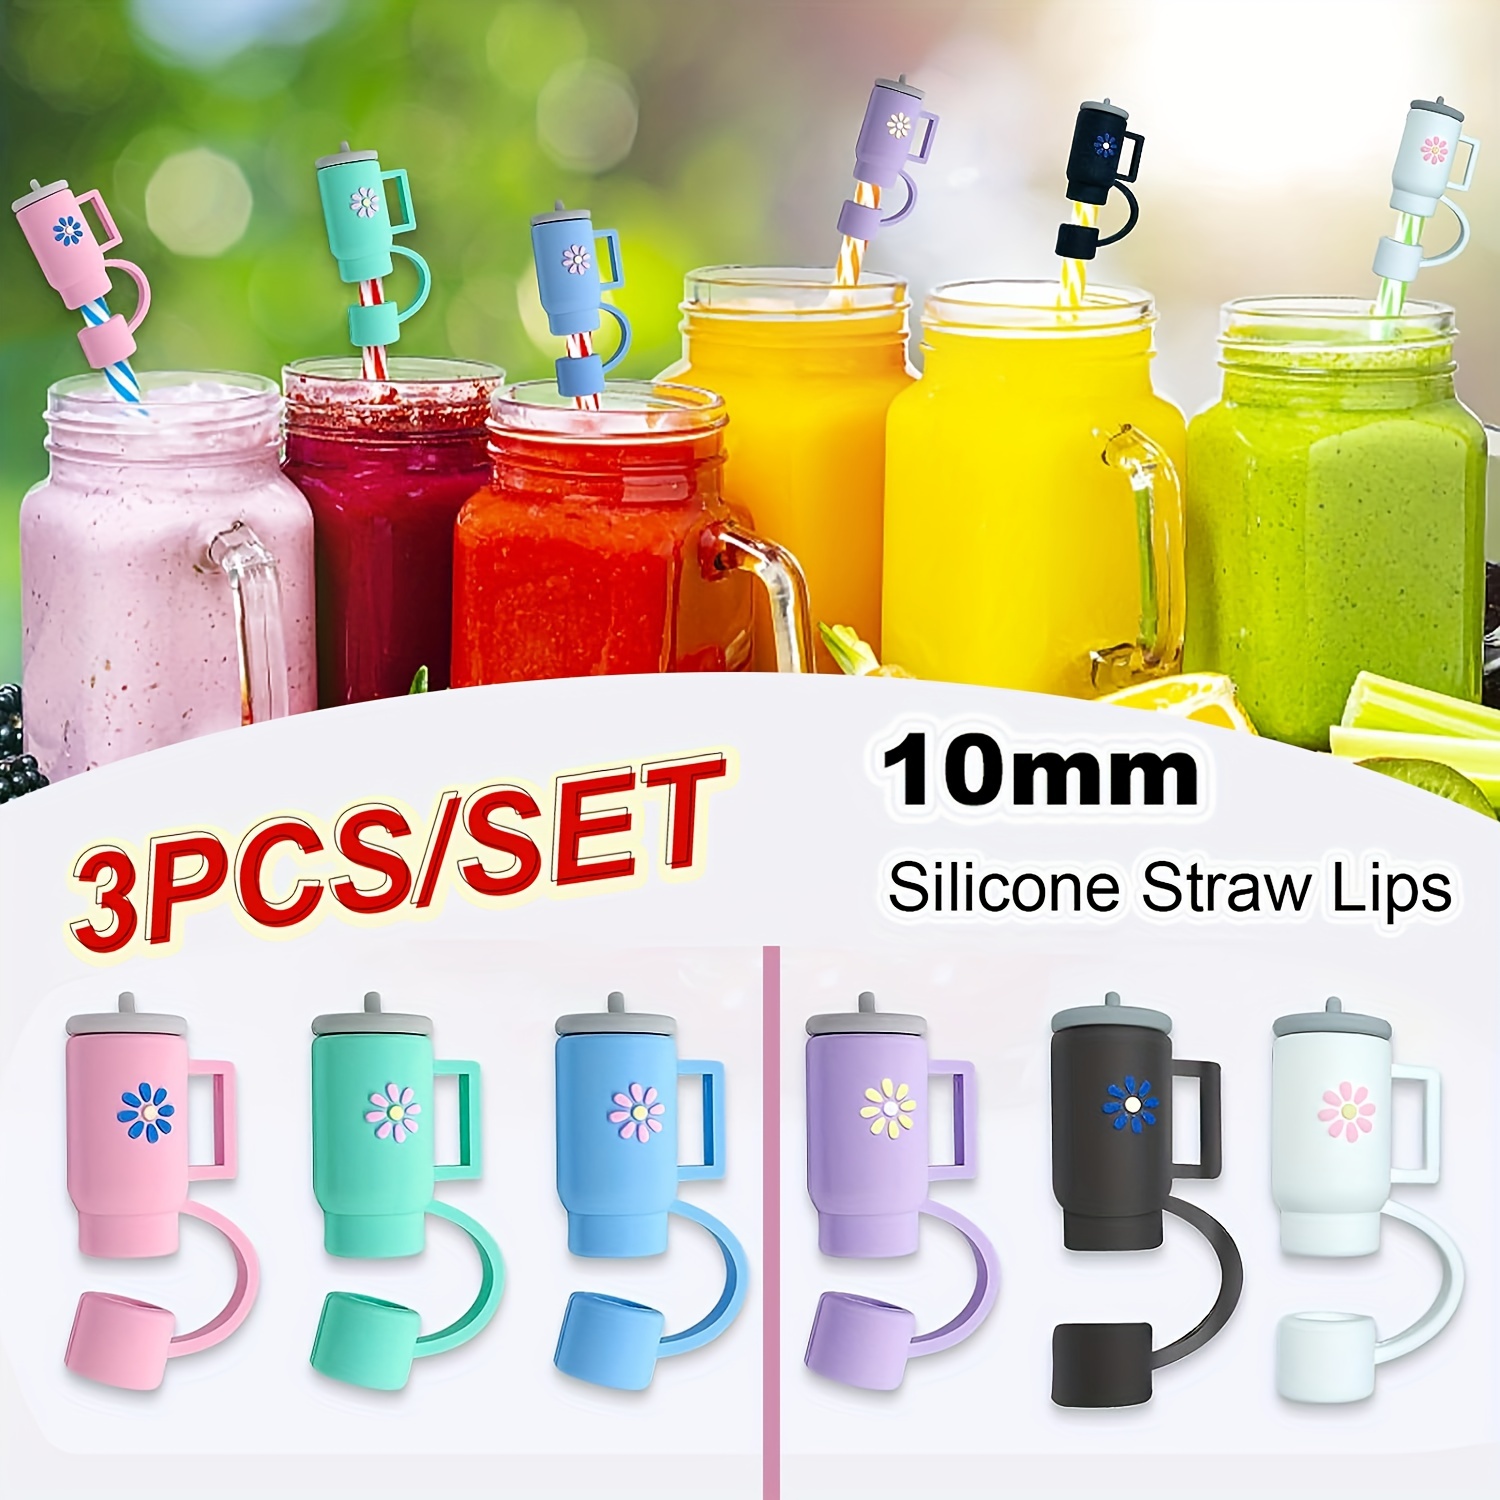 1pc, Straw Tips Cover, 10mm Straw Covers Cap, Cute Reusable Drink Straws  Covers, Straw Protectors, Cup Shape Soft Silicone Straw Lids